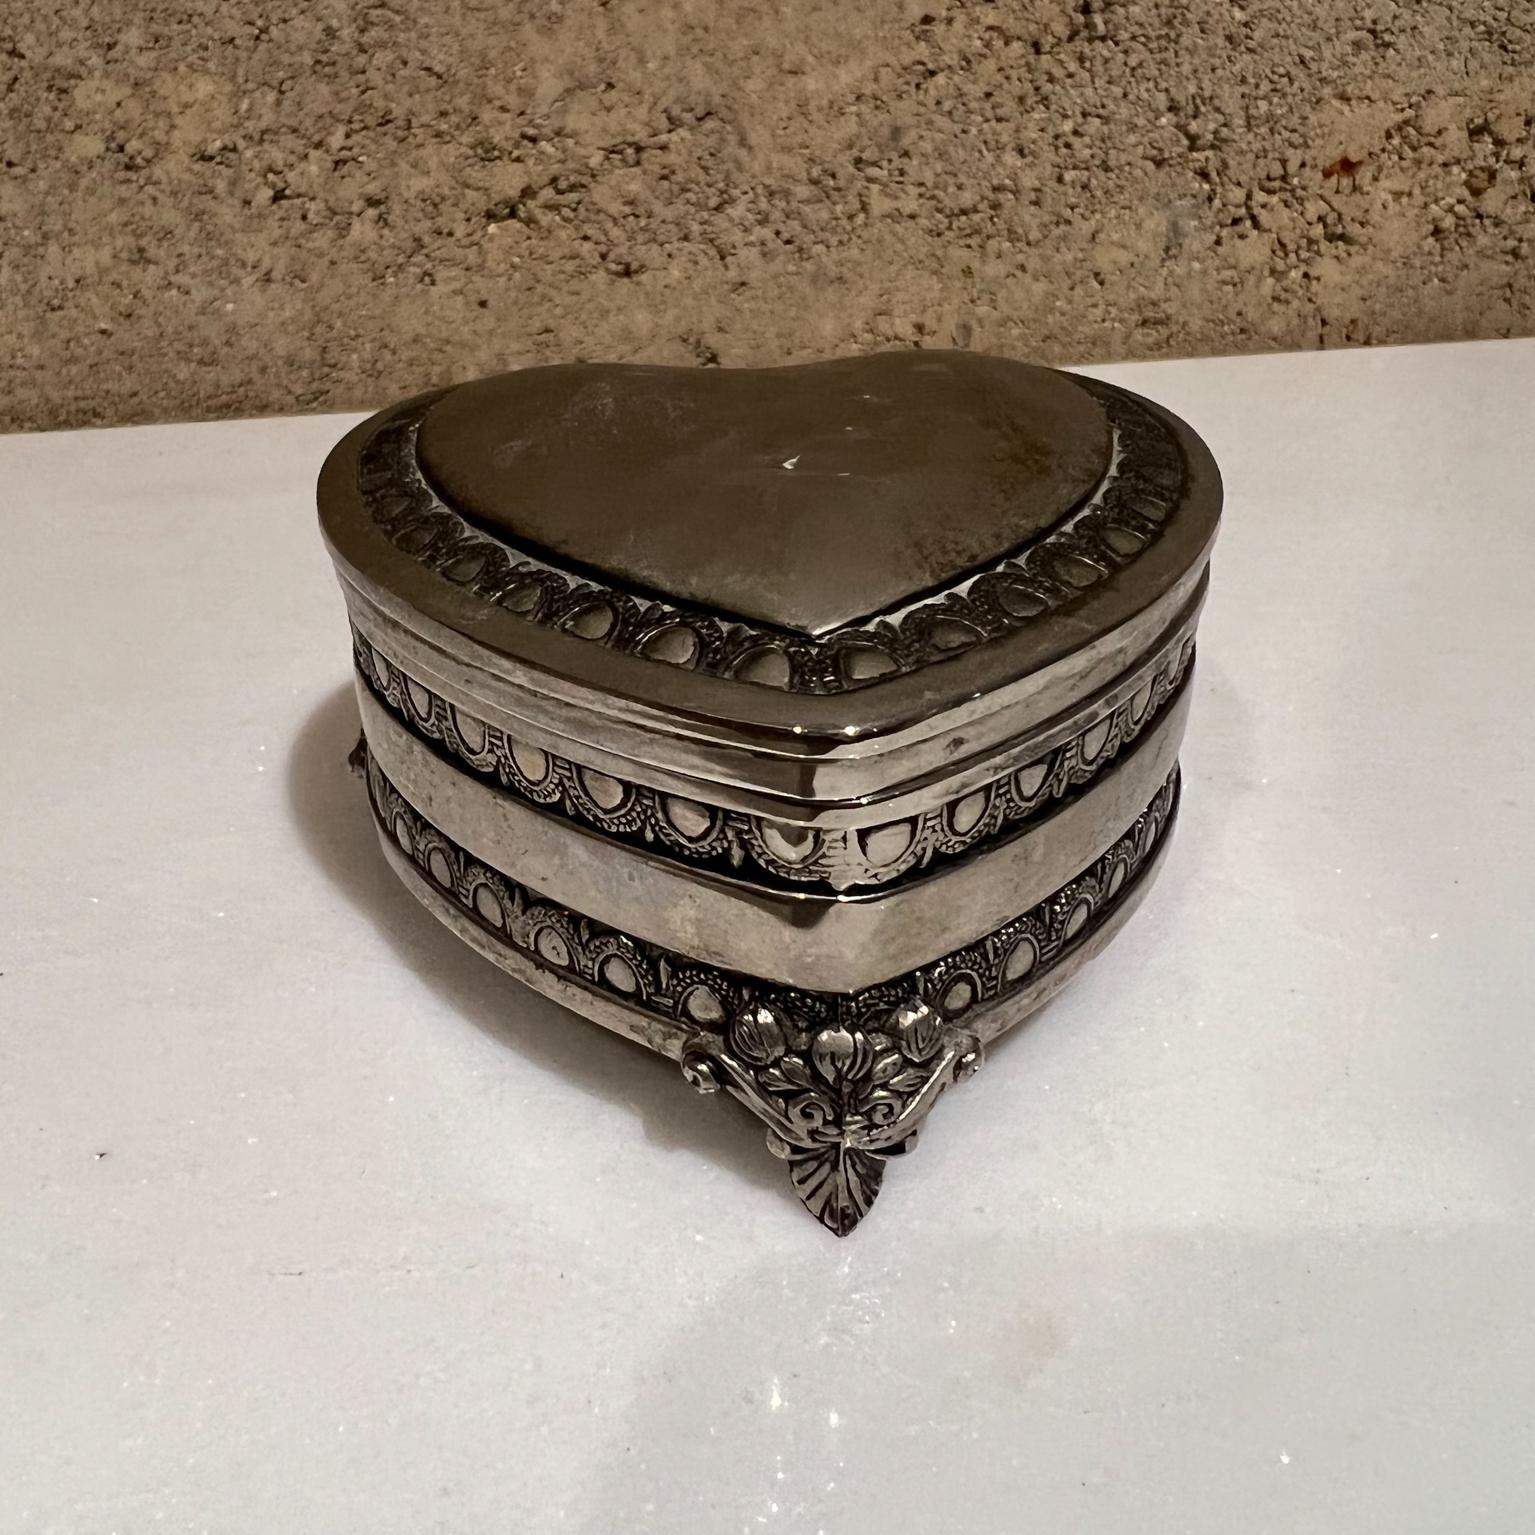 Pretty decorative keepsake silver heart trinket box purple lining.
Measures: 2.5 tall (closed) x 3.5 deep x 3.5 wide
Original unrestored vintage condition.
See images provided.
 